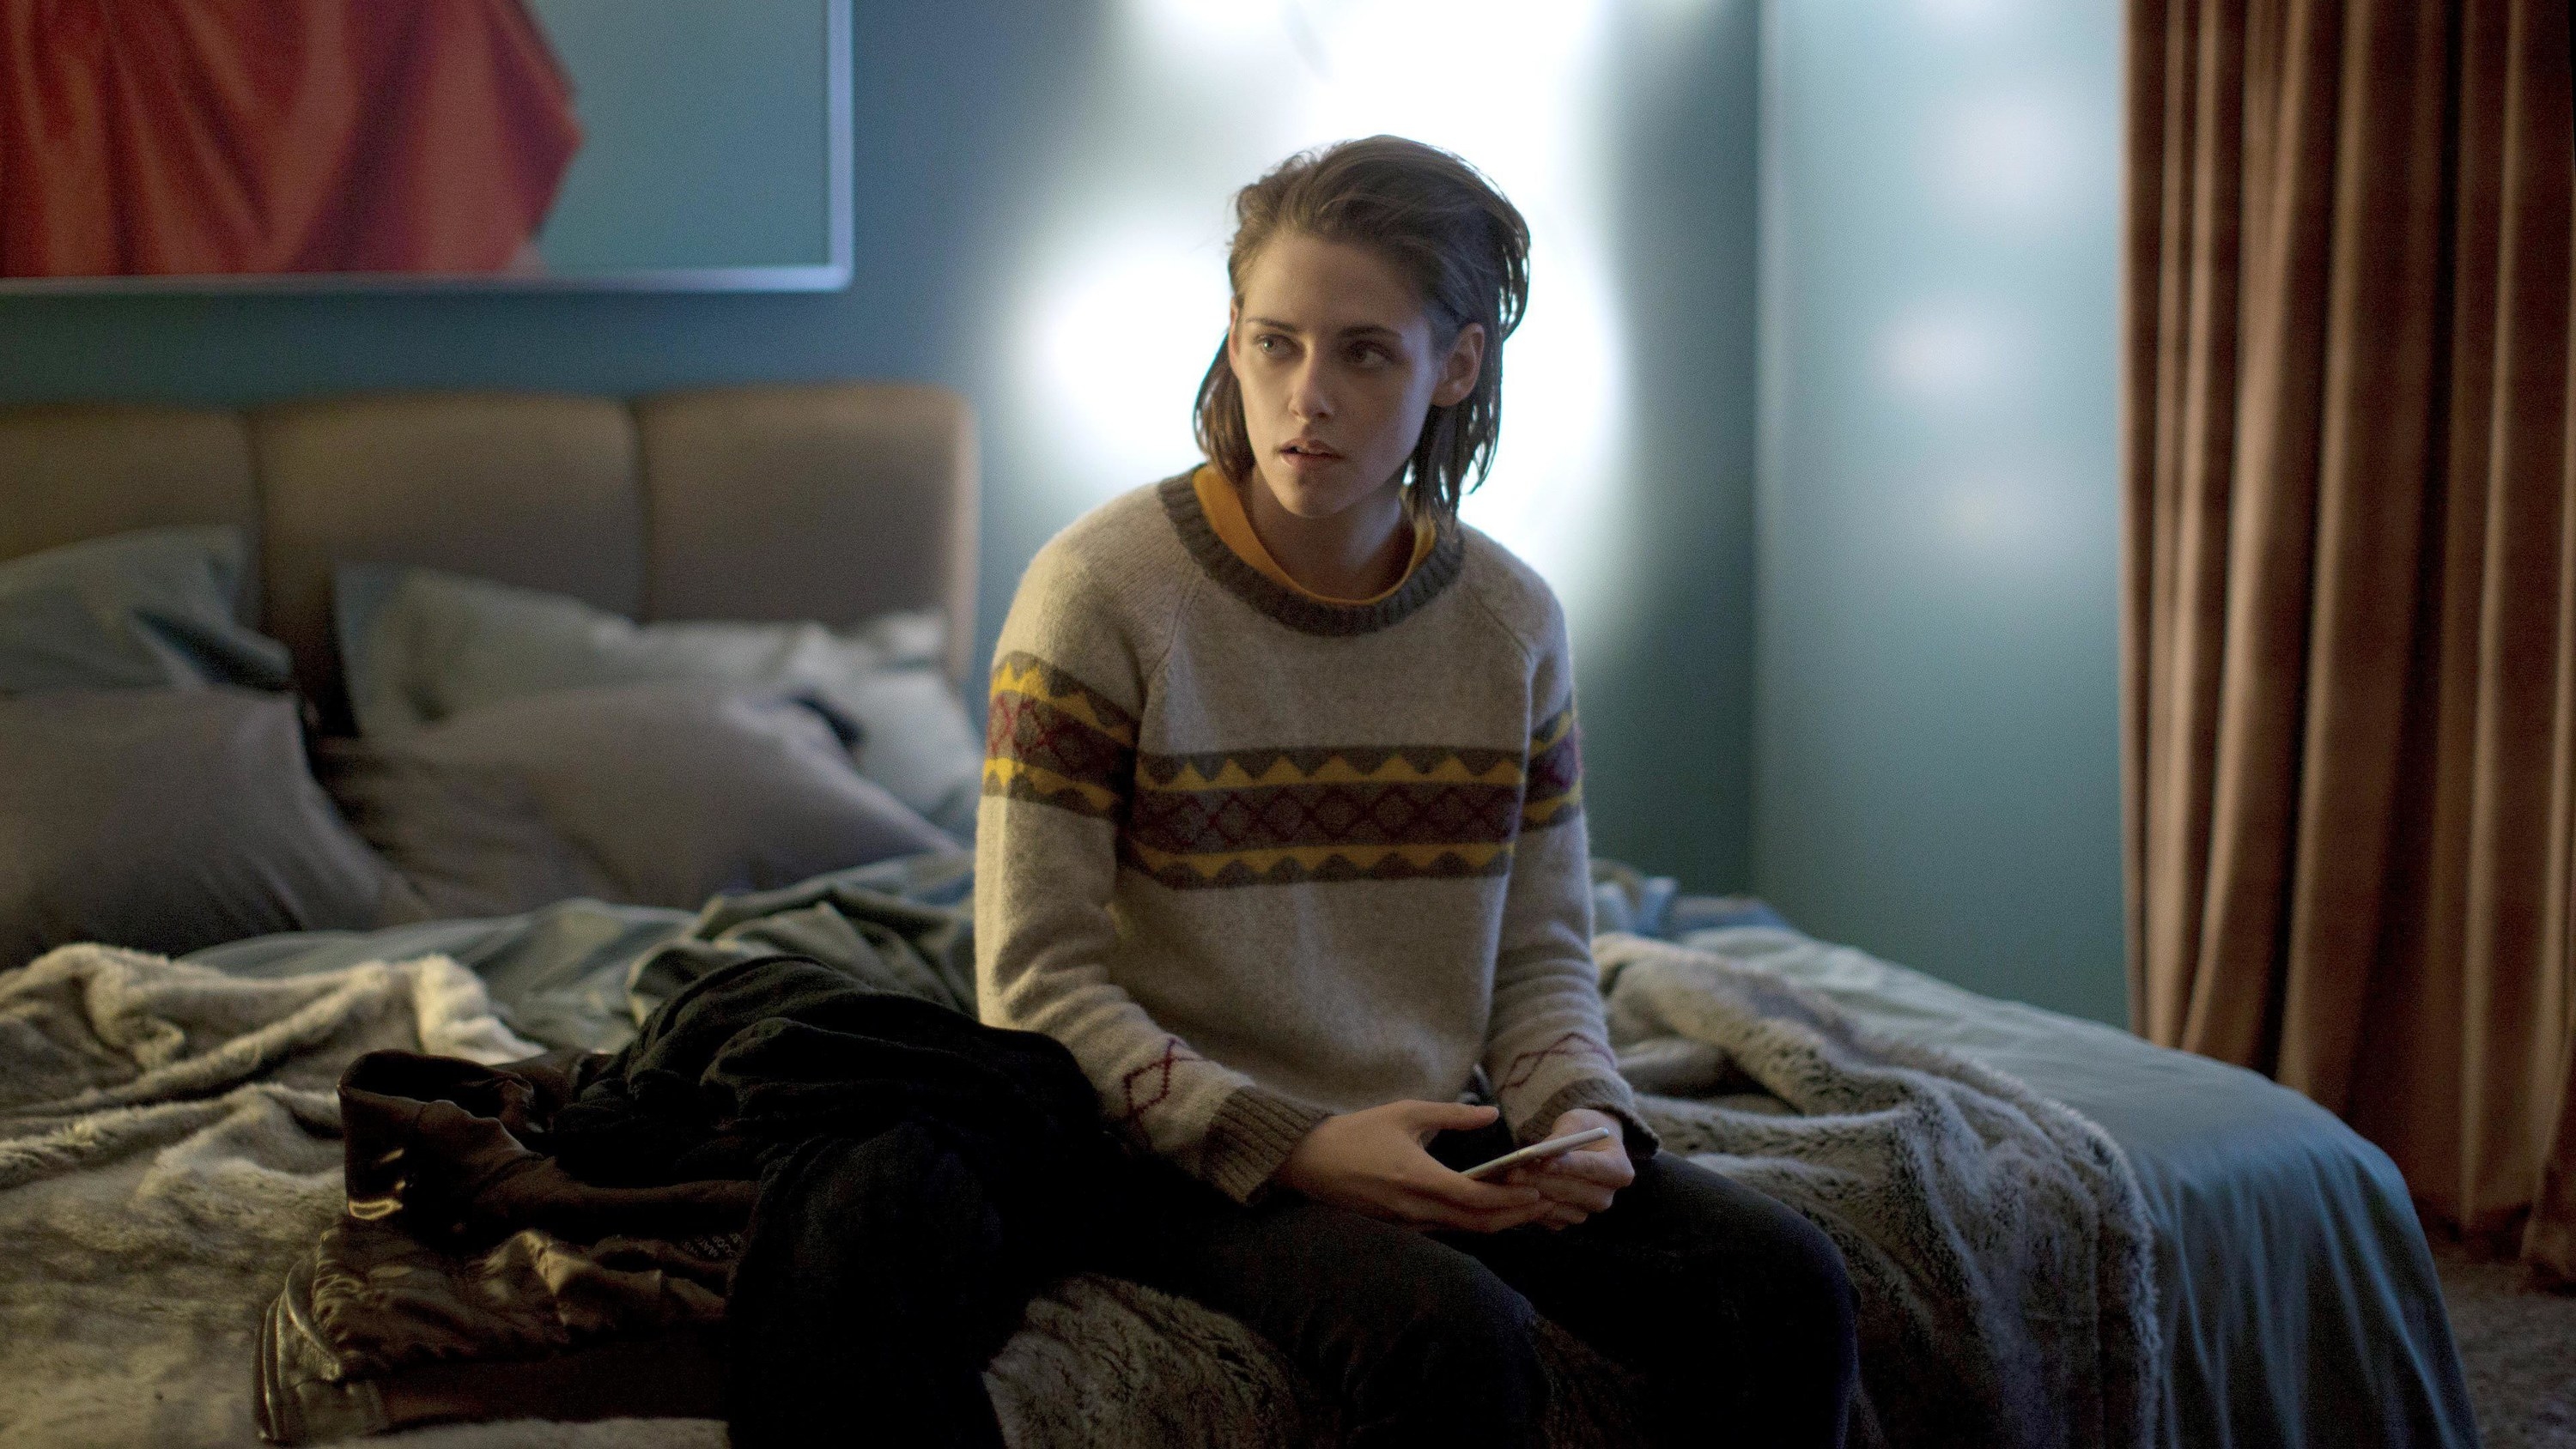 Kristen Stewart sits on a bed looking distressed